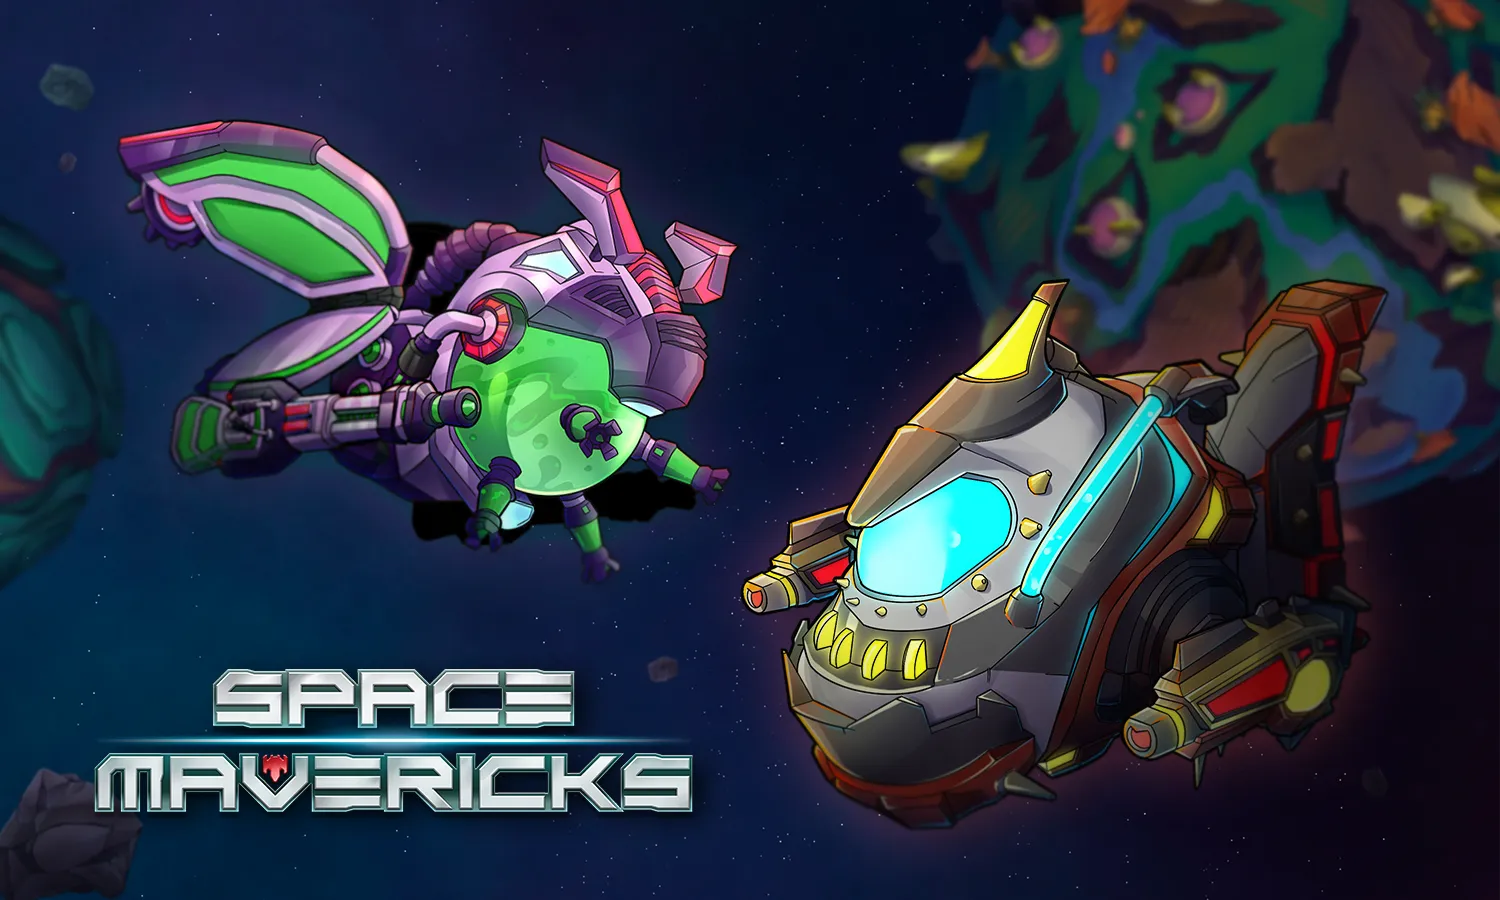 One of the Spaceships in Space Mavericks, a real-time multiplayer and cross-platform game that recreates the classic artillery style of aiming and shooting.